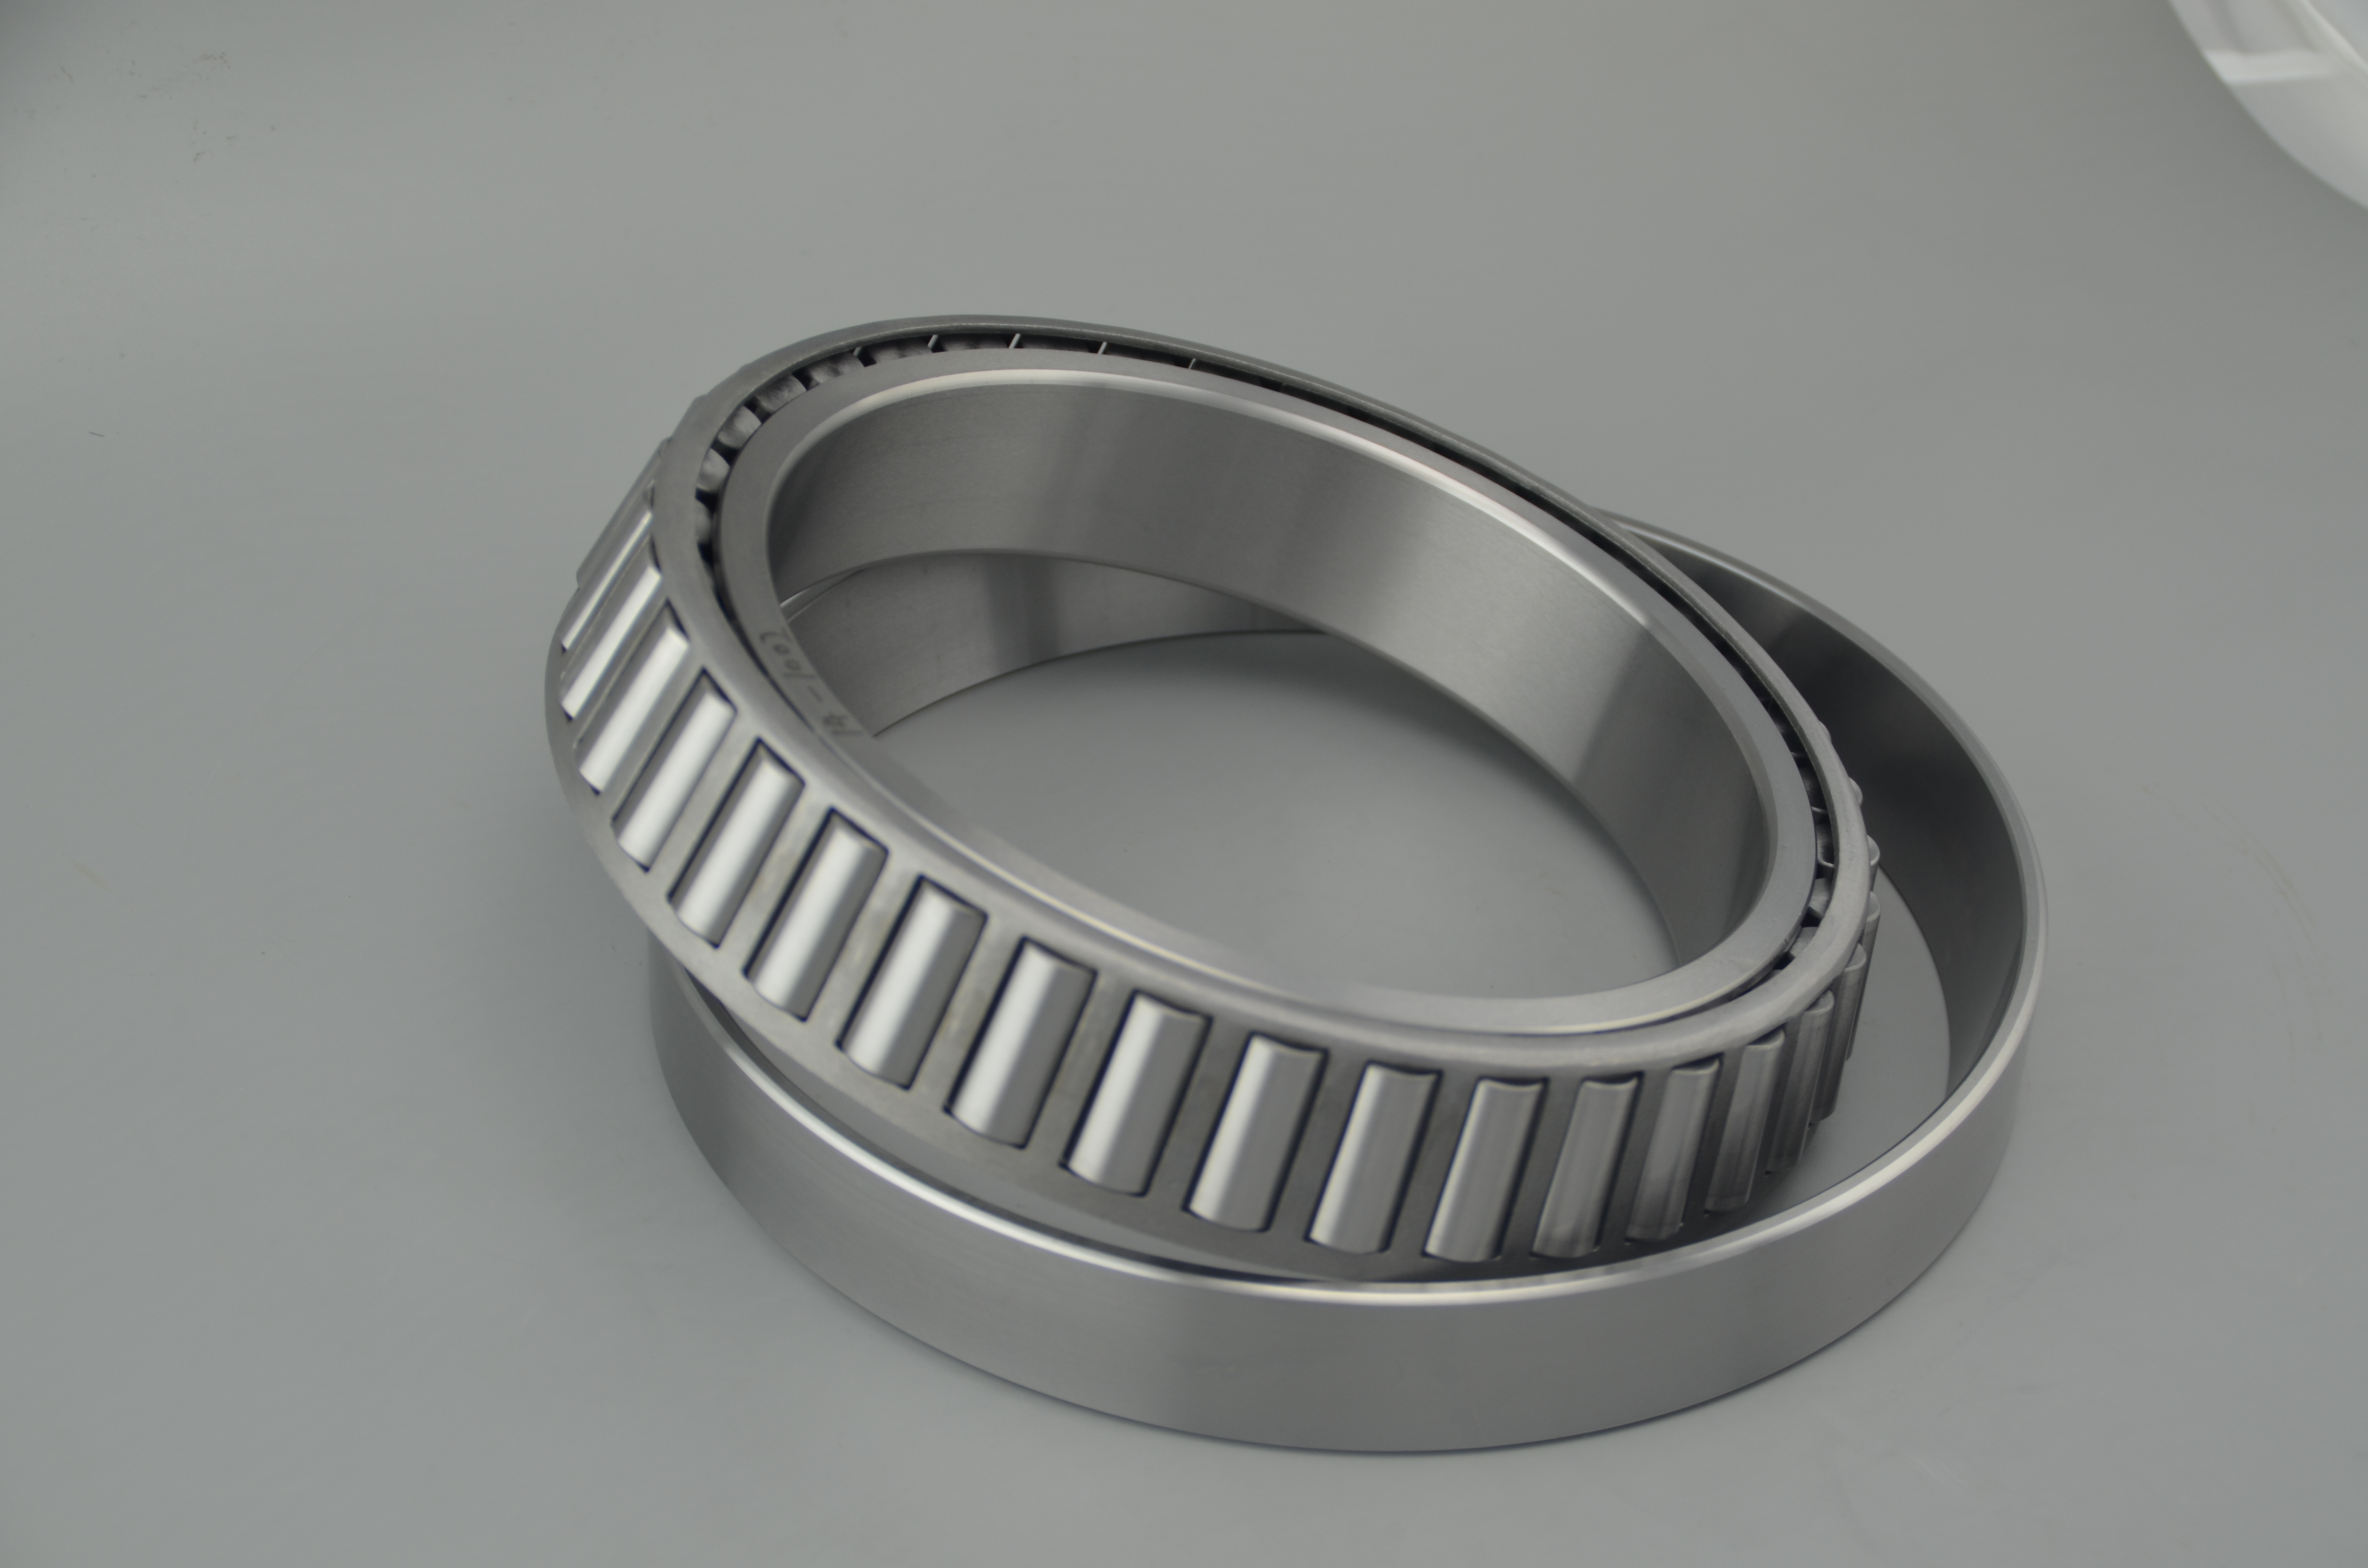 Precision tapered roller bearings